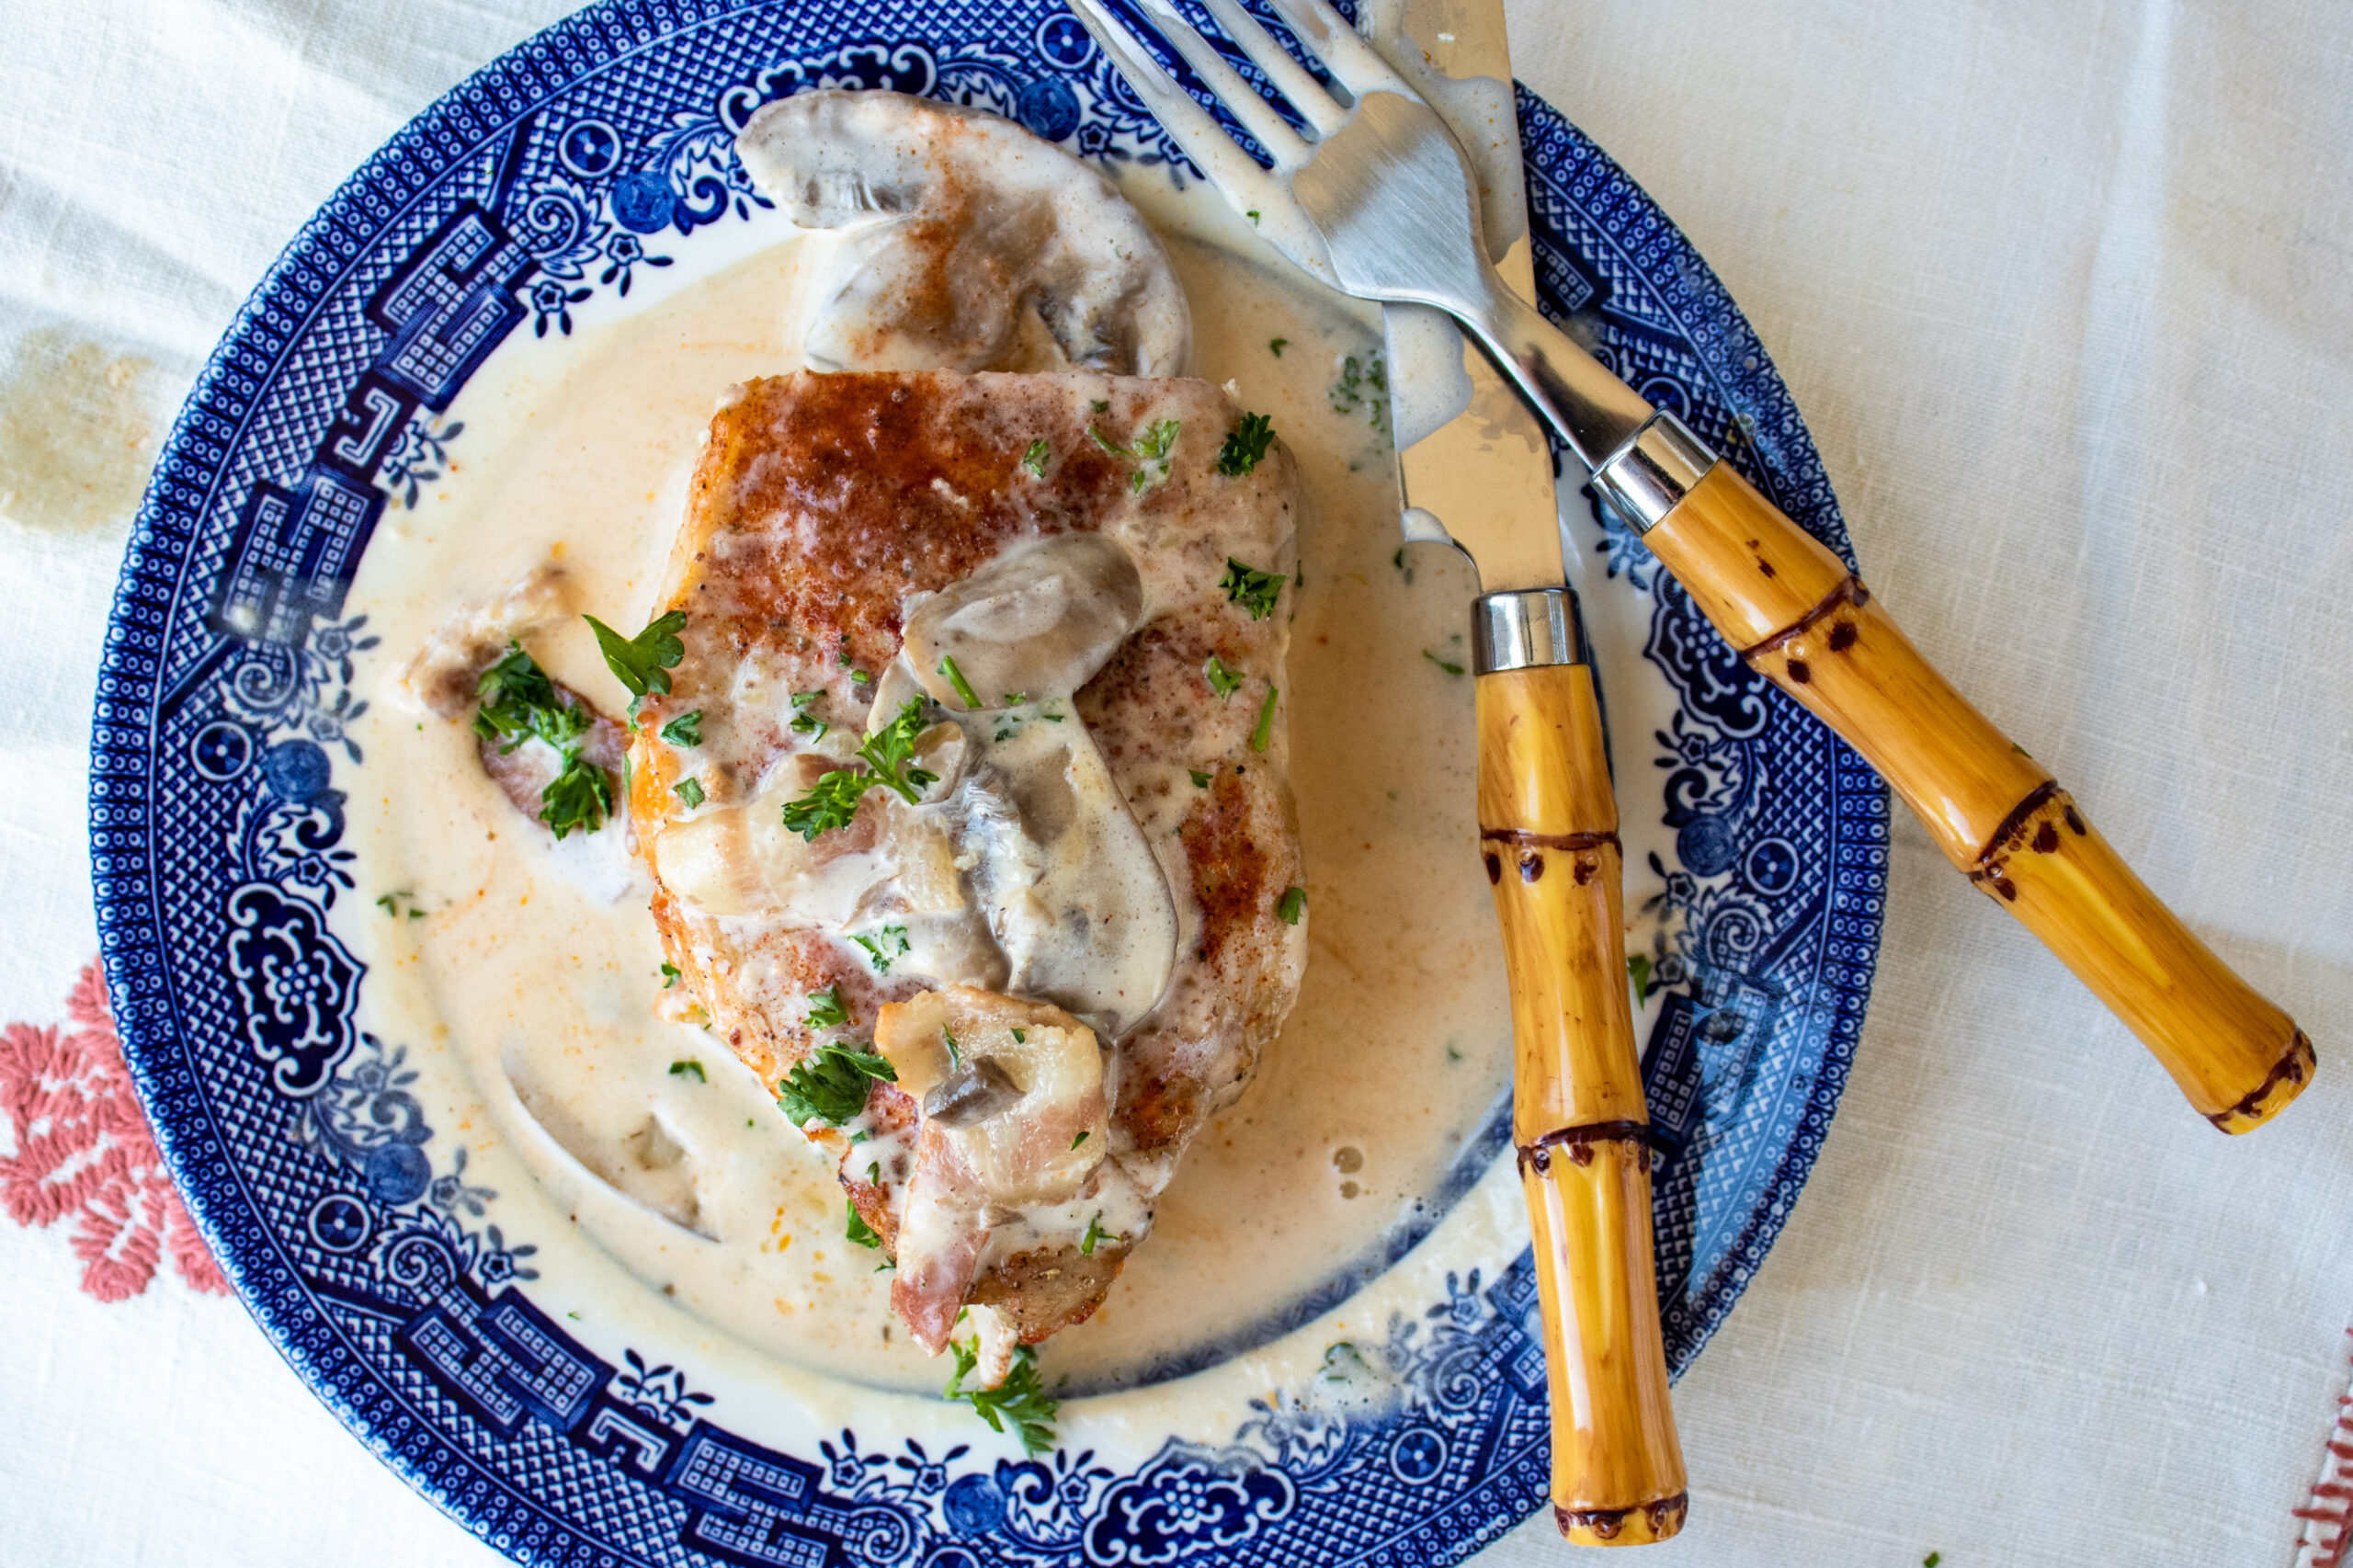 Baked boneless pork chops smothered with bacon and mushroom cream sauce.